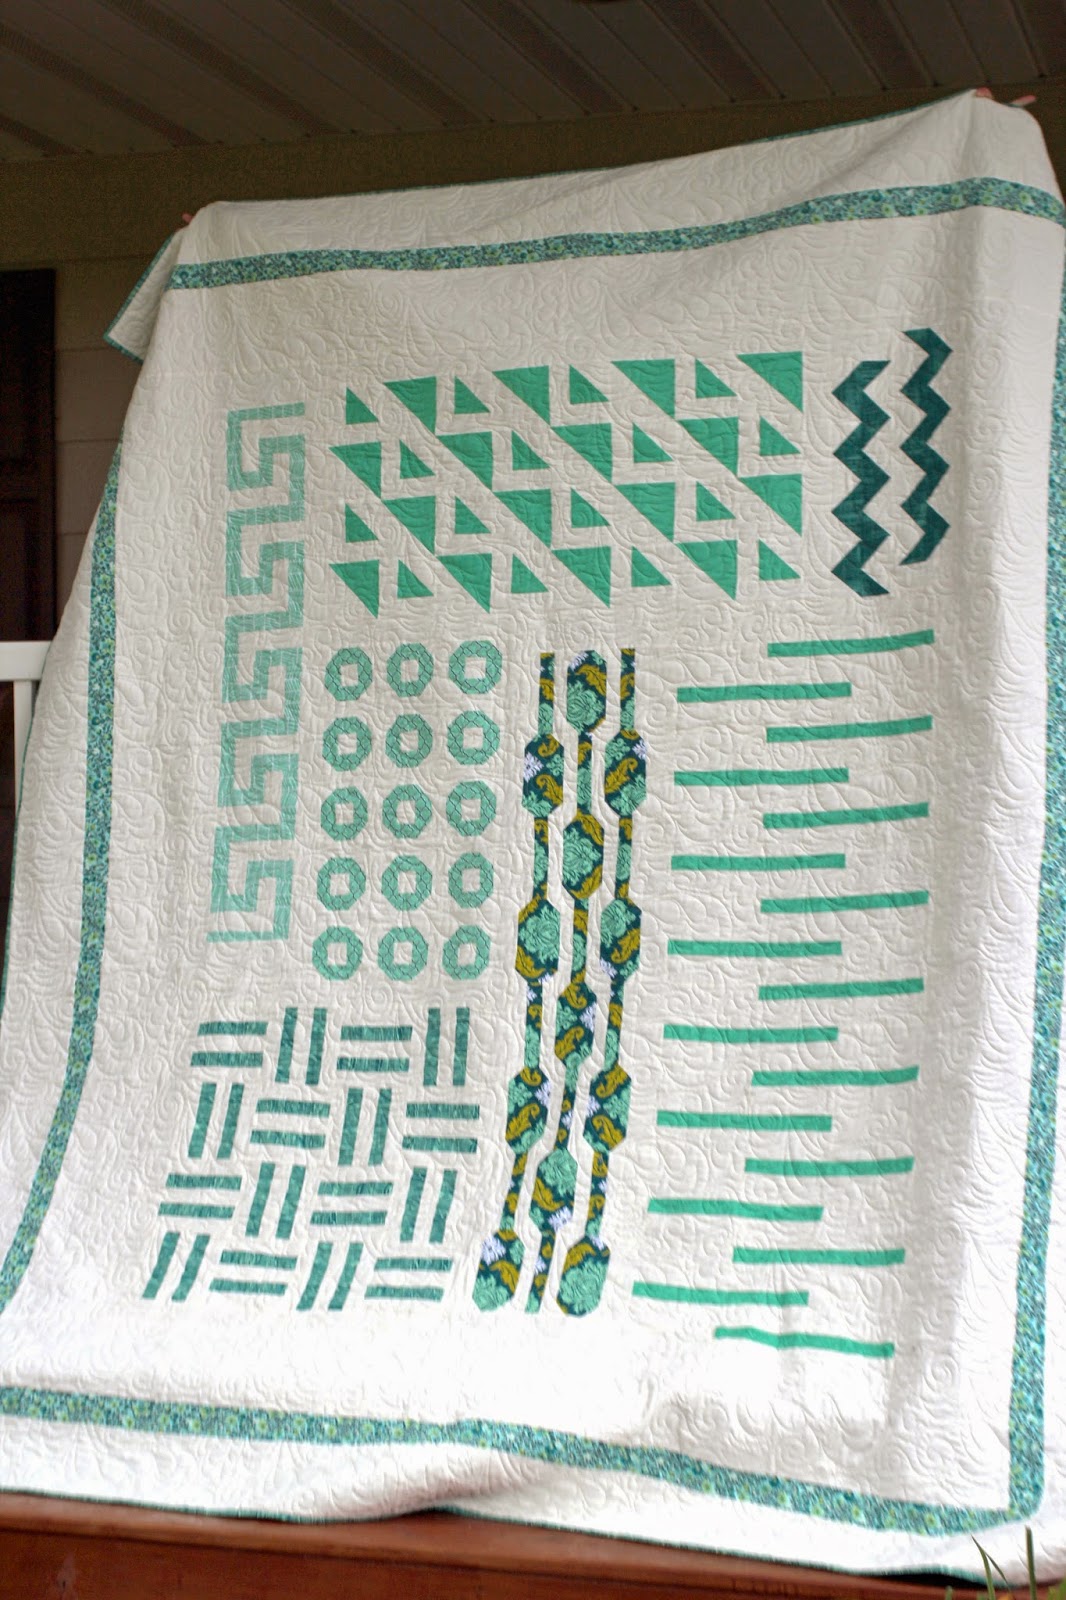 Girls in the Garden - Graphic Mixx quilt using shades of green